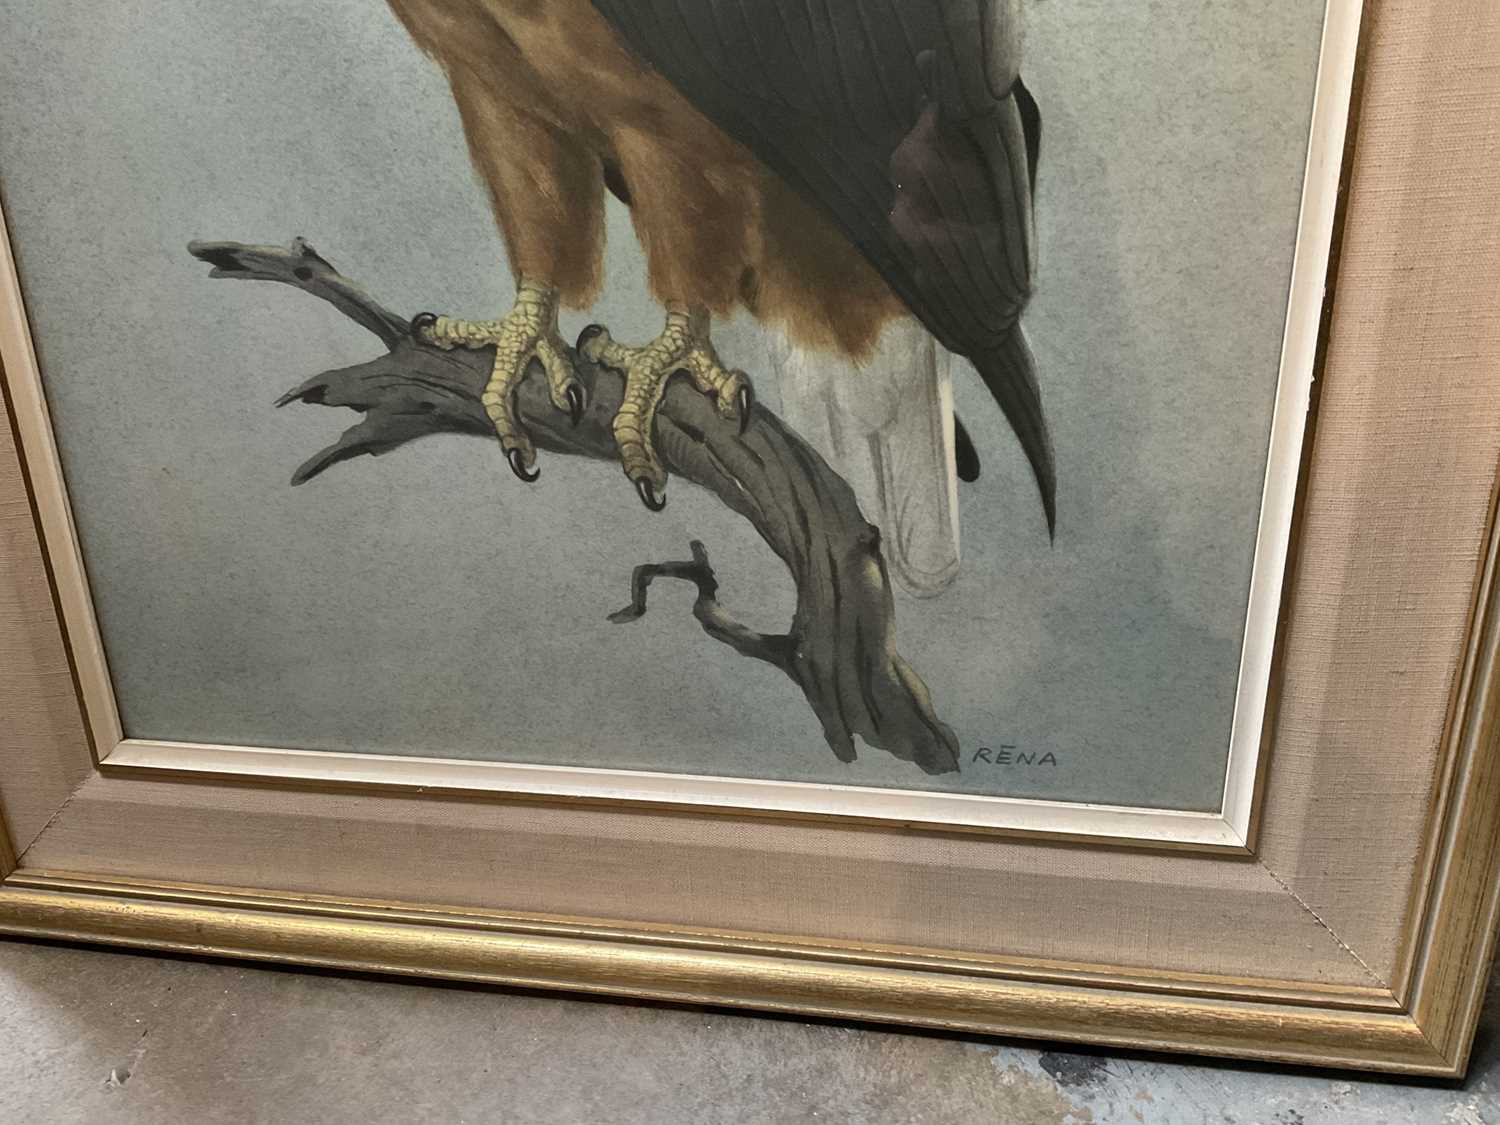 Charles Clifford Turner, watercolour - Otters and a watercolour of a bald eagle, by Rena - Image 2 of 5